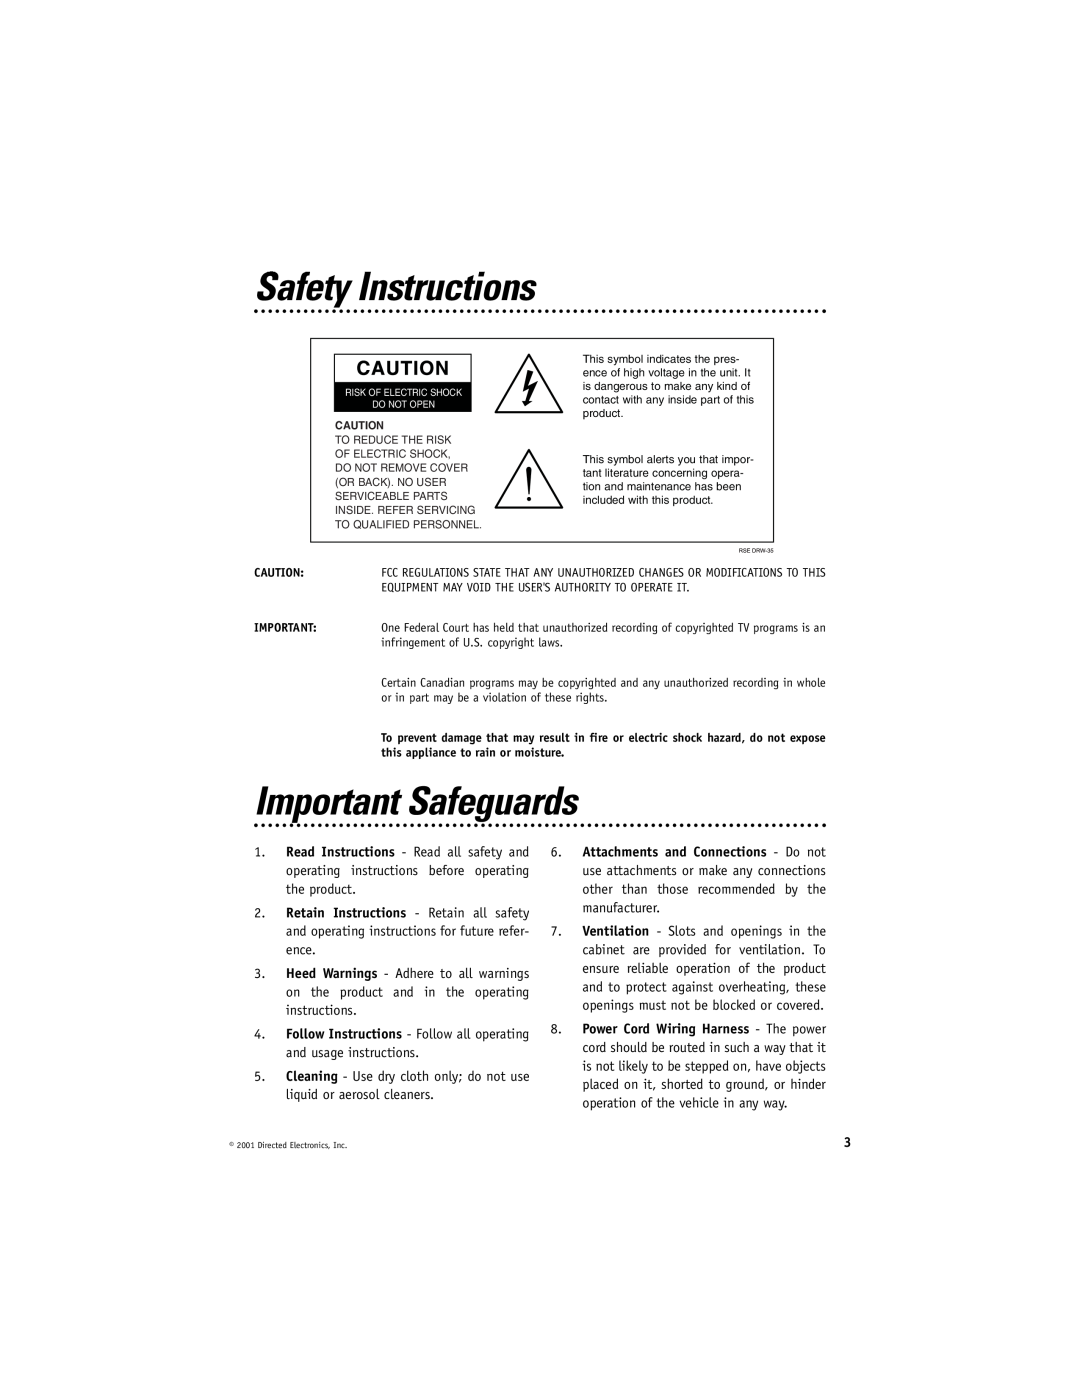 Directed Electronics VC2010 manual Safety Instructions, Important Safeguards 